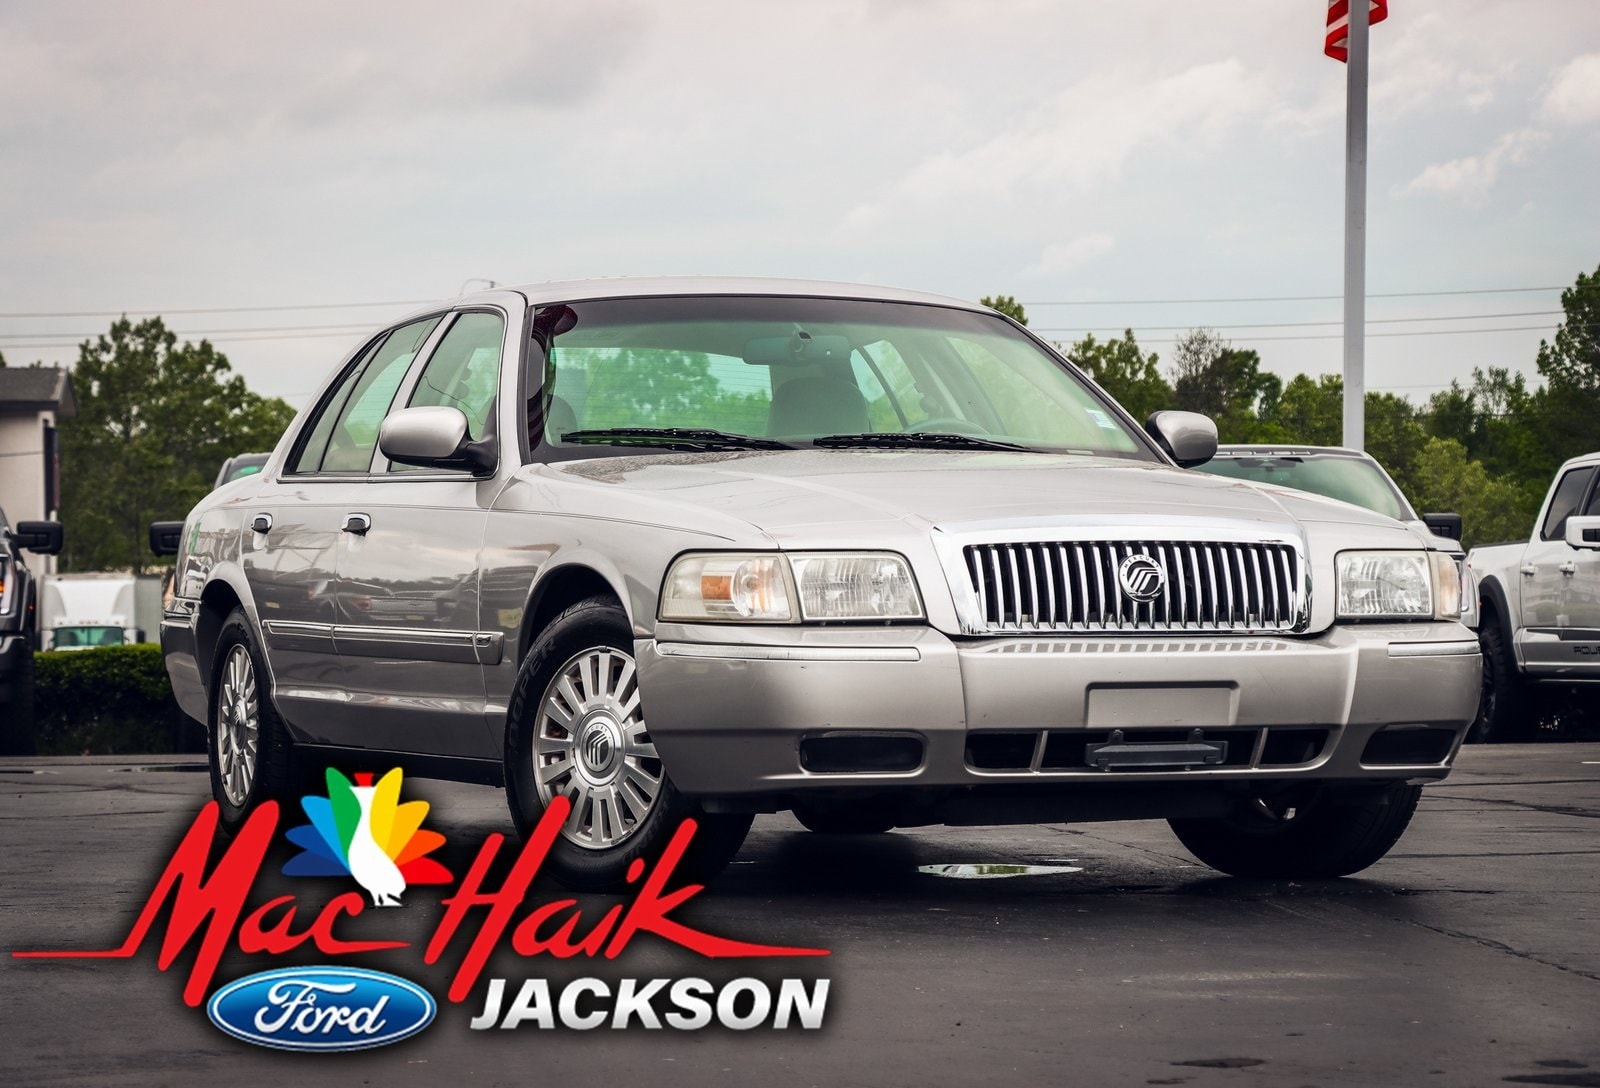 Used 2006 Mercury Grand Marquis LS with VIN 2MEFM75V76X625905 for sale in Jackson, MS